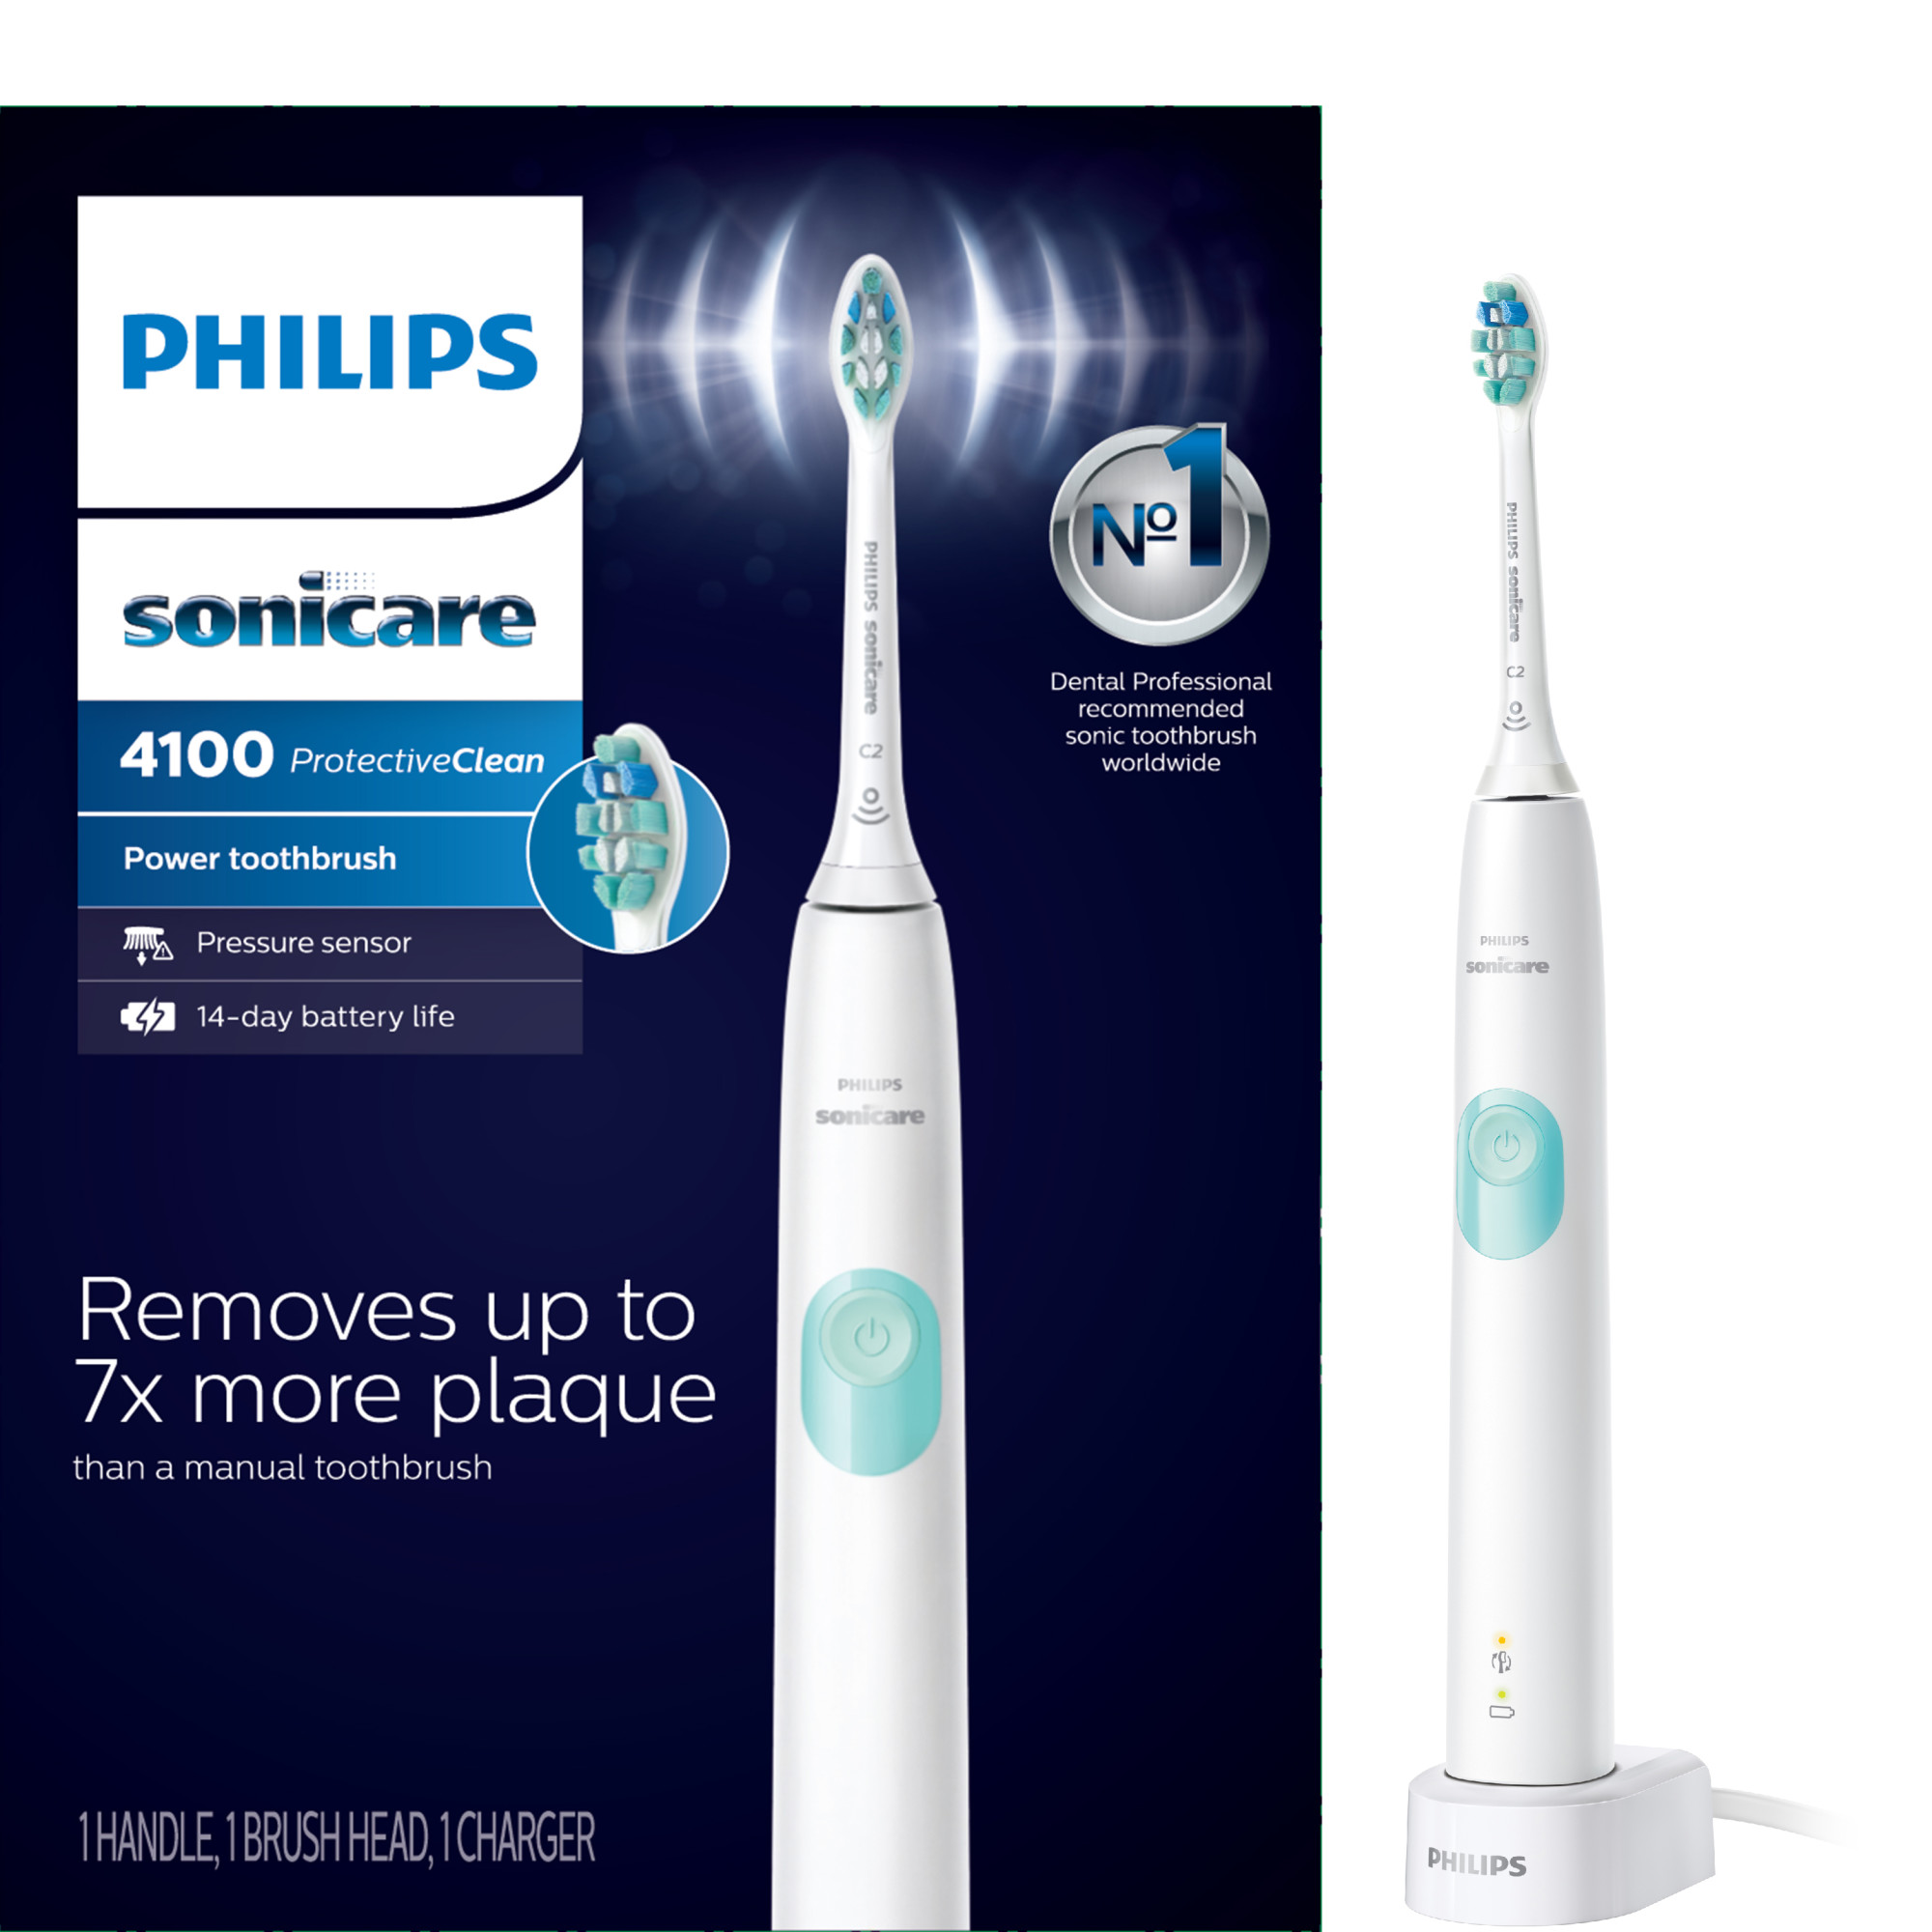 Philips Sonicare ProtectiveClean 4100 Plaque Control, Rechargeable Electric Toothbrush with Pressure Sensor, White Mint HX6817/01 - image 1 of 14